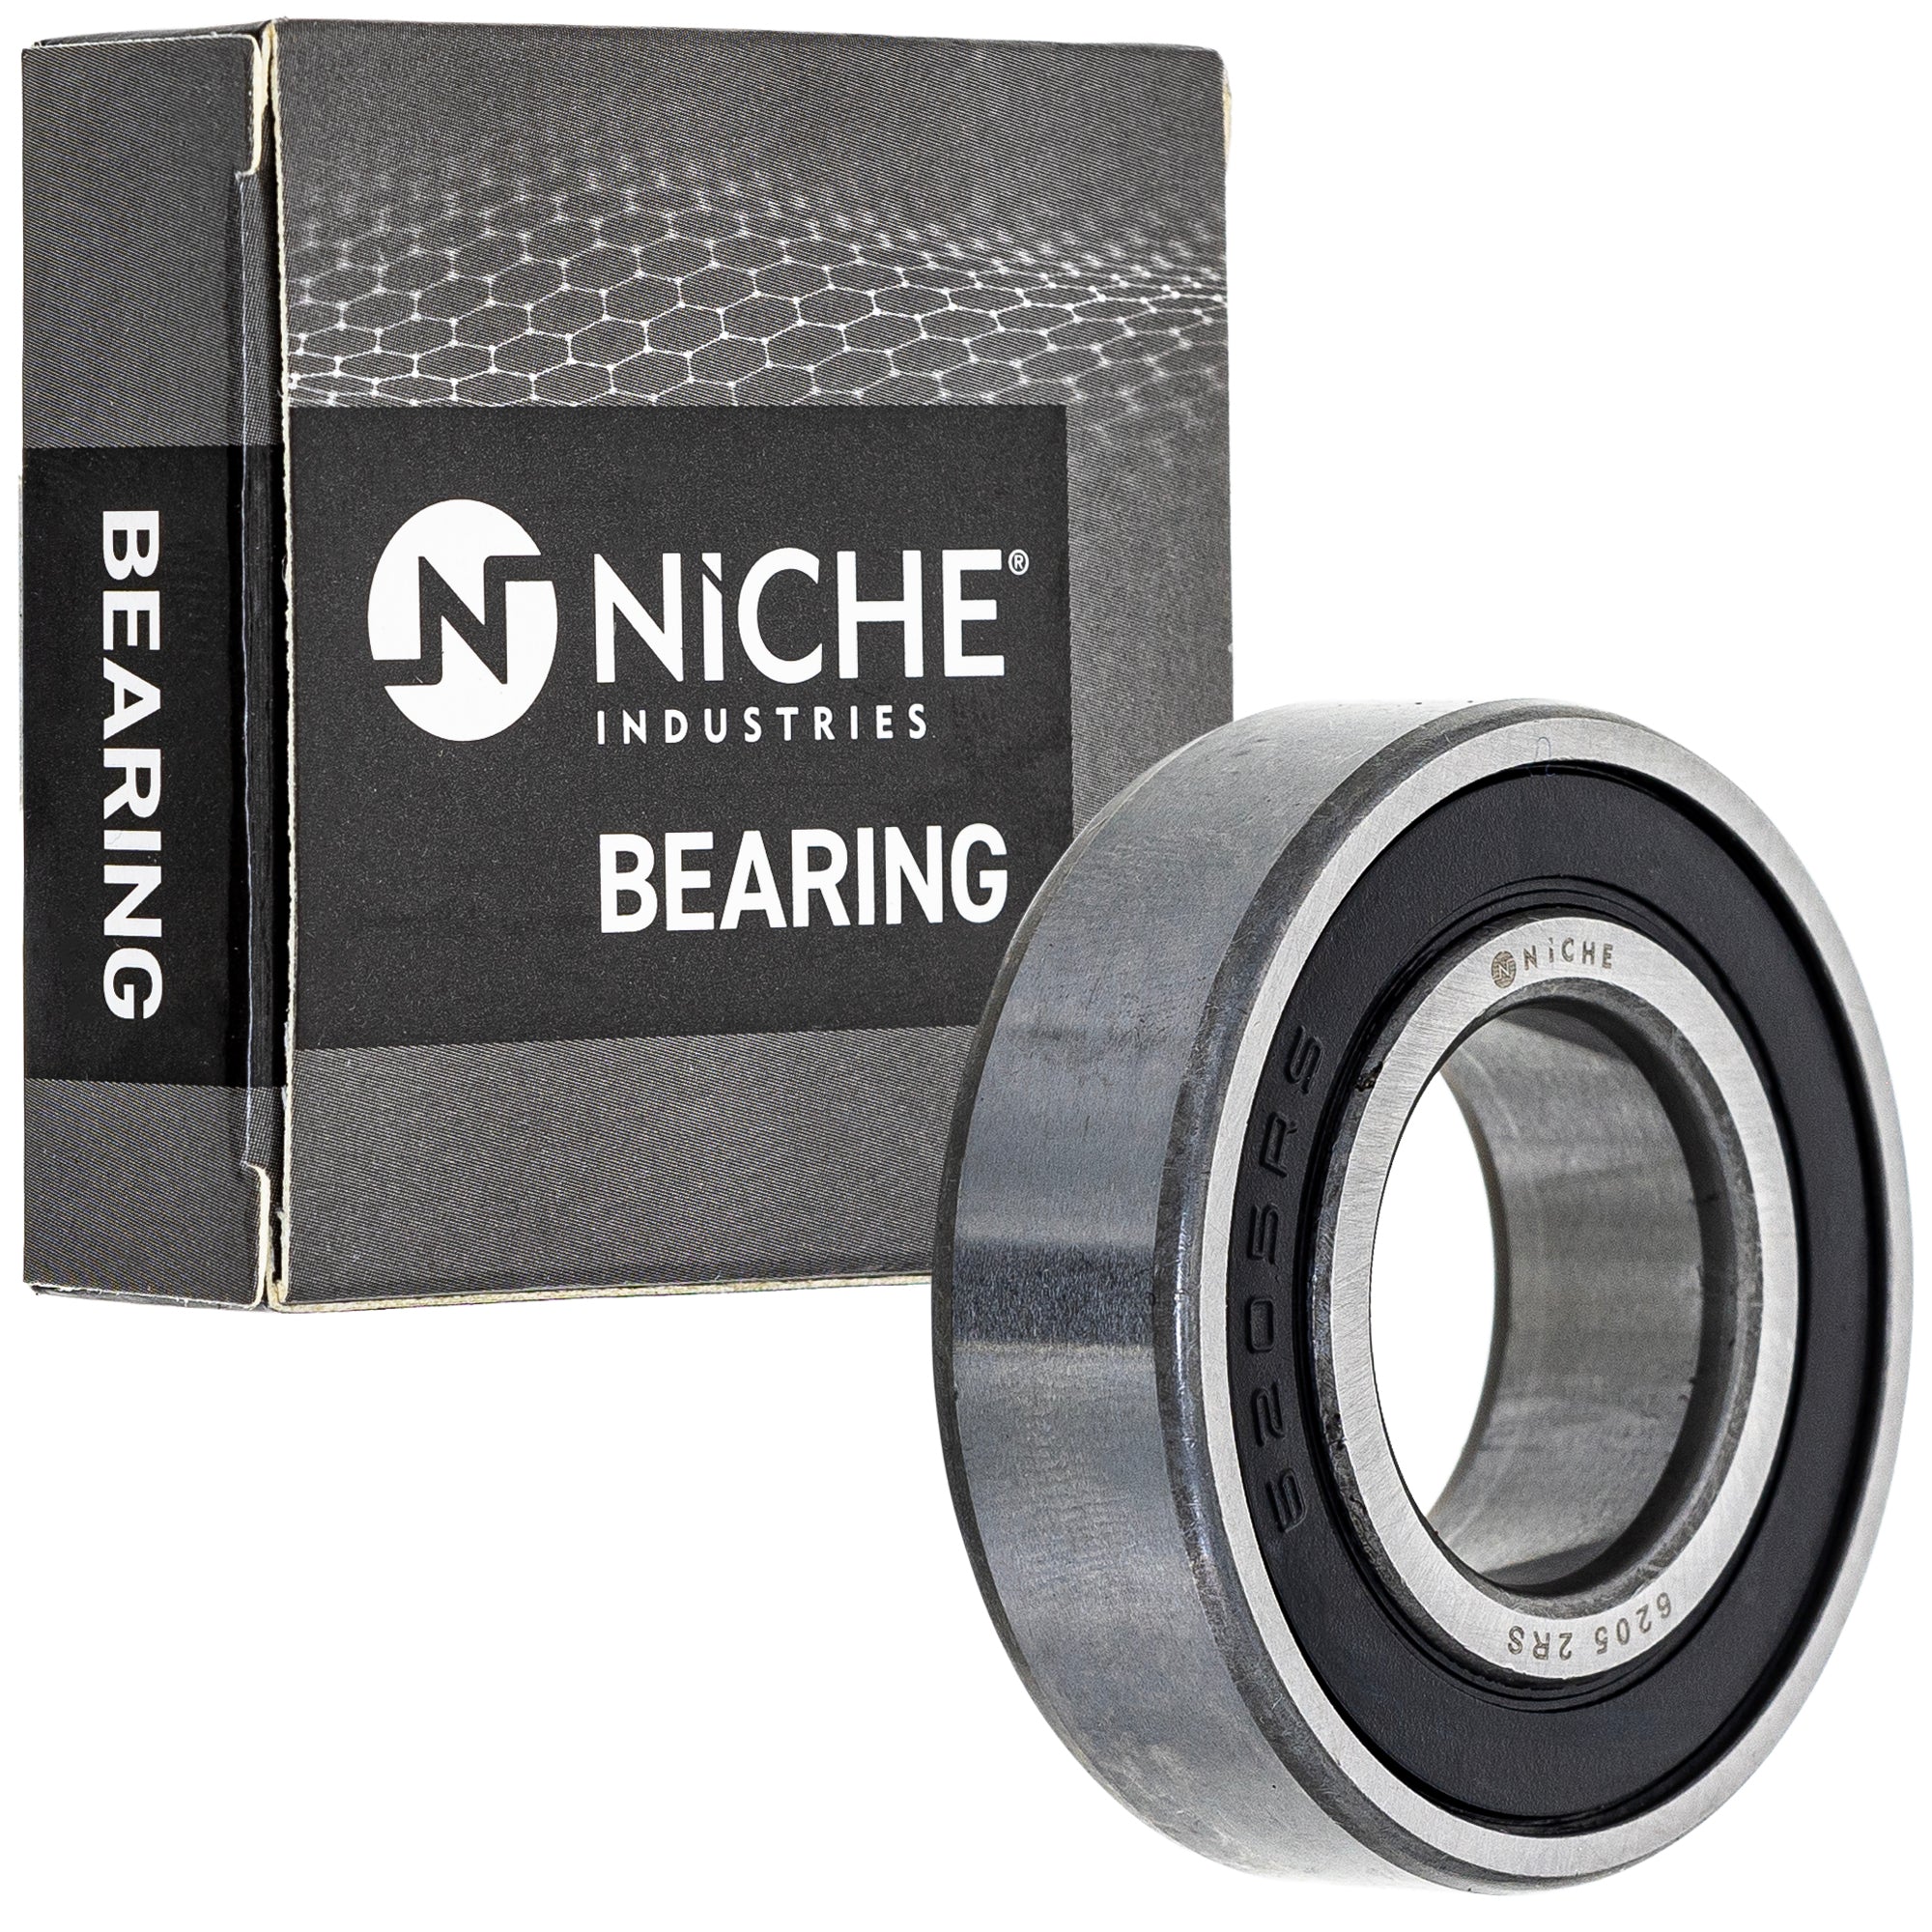 NICHE 519-CBB2228R Bearing 2-Pack for zOTHER Toro Exmark Snapper